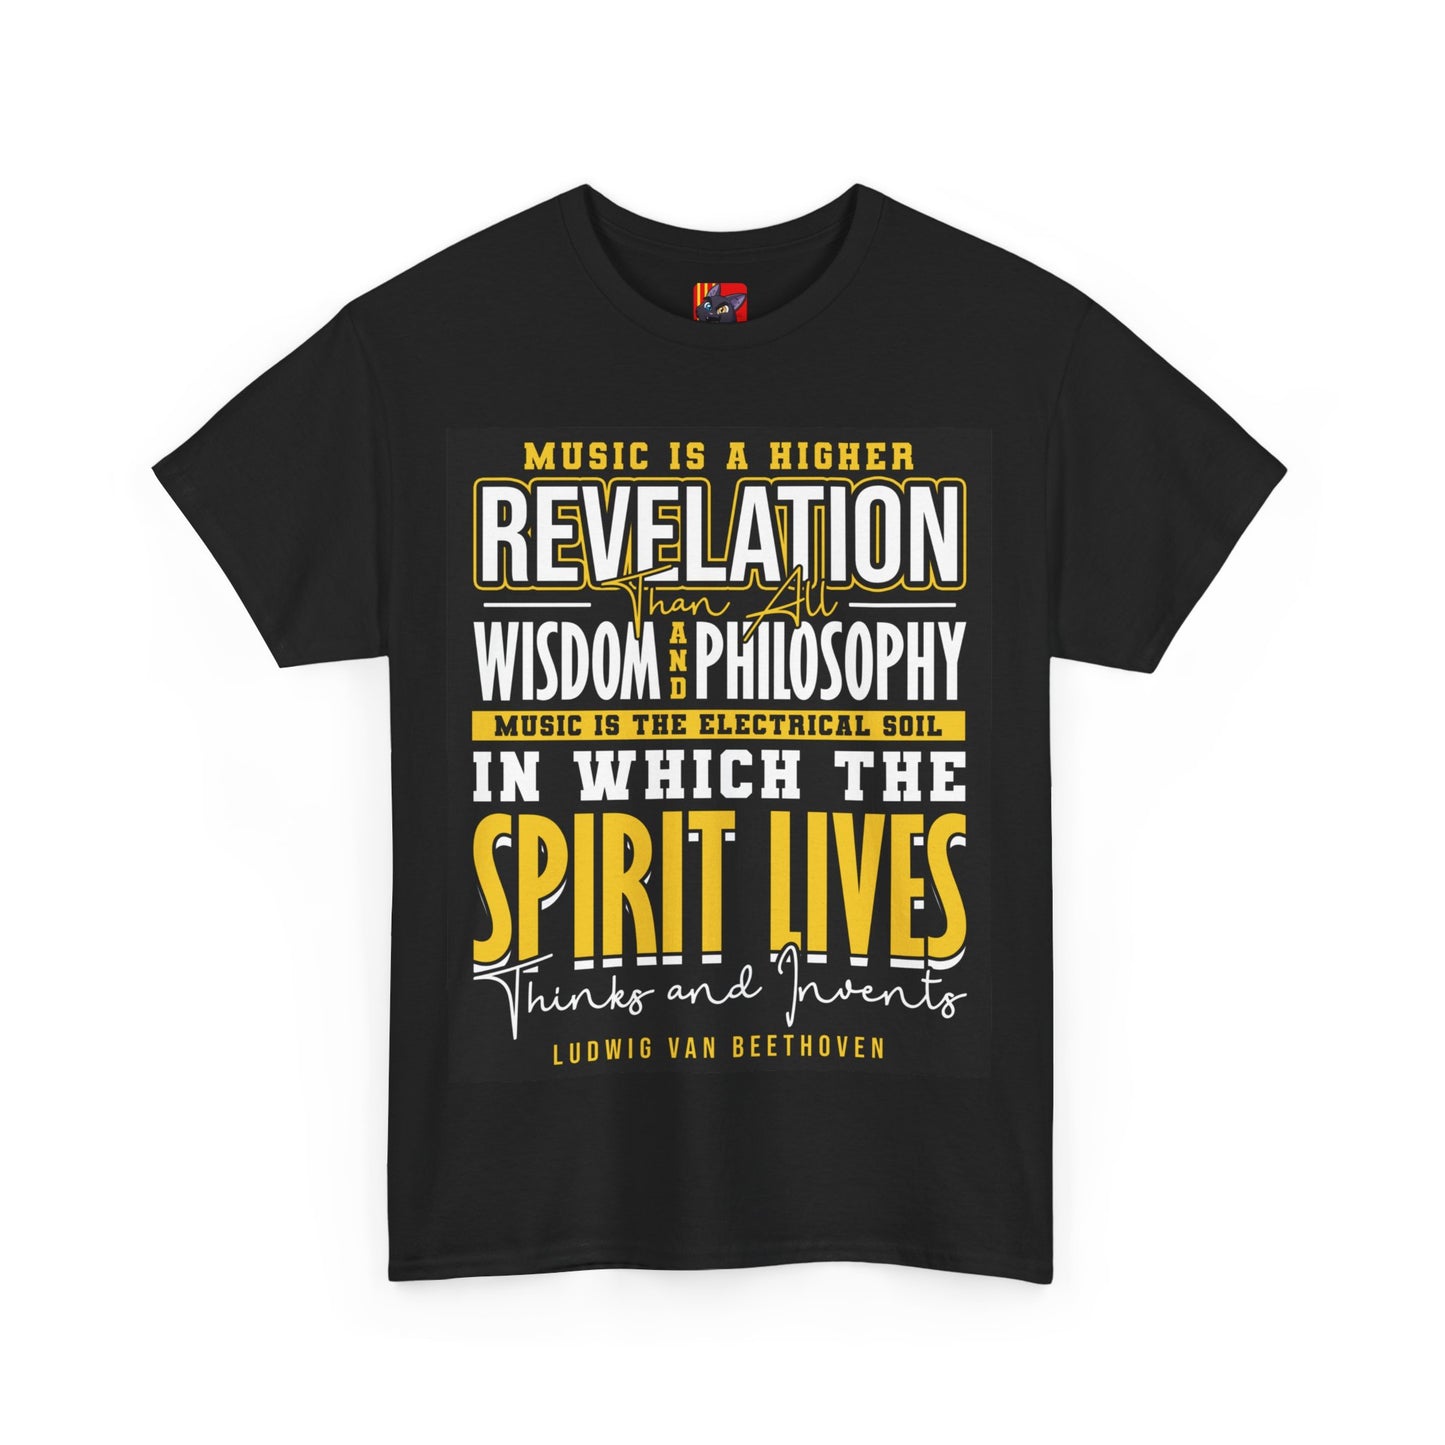 The Soul of Music T-Shirt: Music is a higher revelation than all wisdom and philosophy